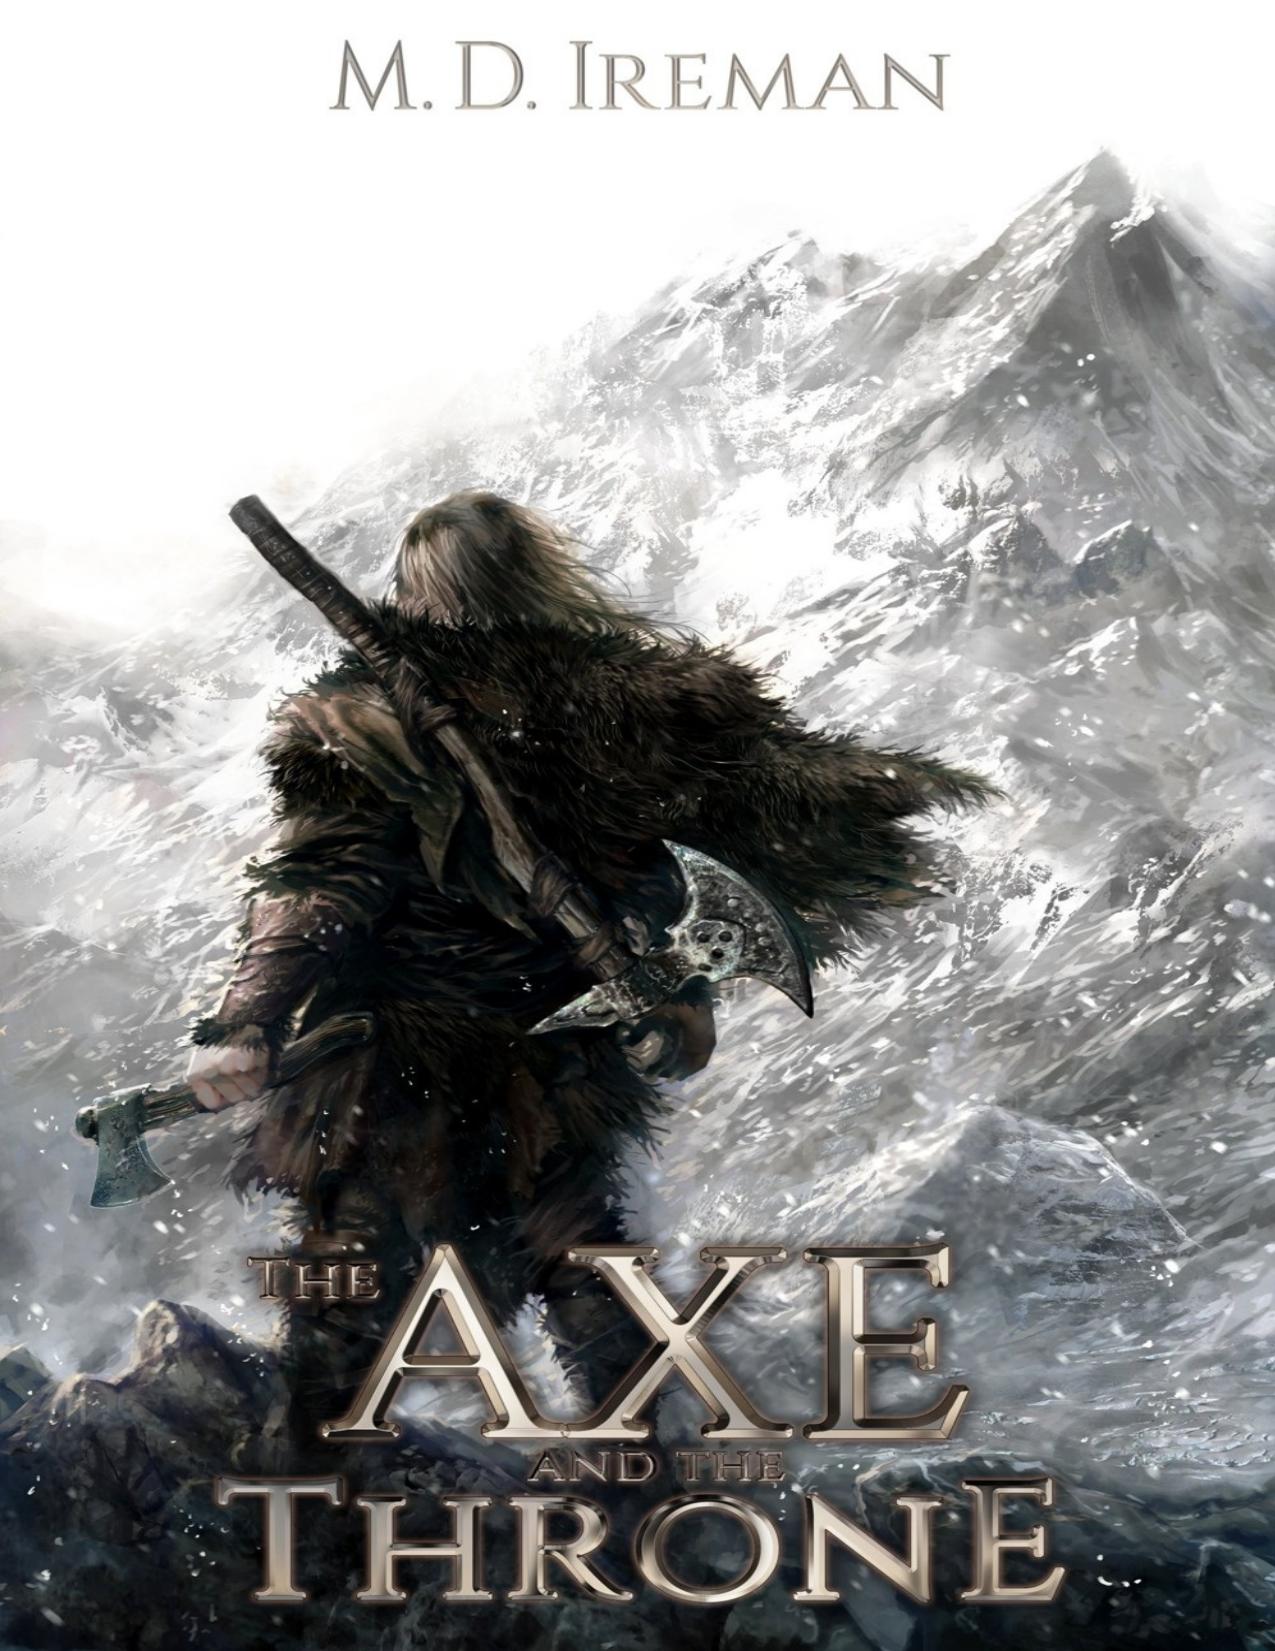 The Axe and the Throne by M. D. Ireman